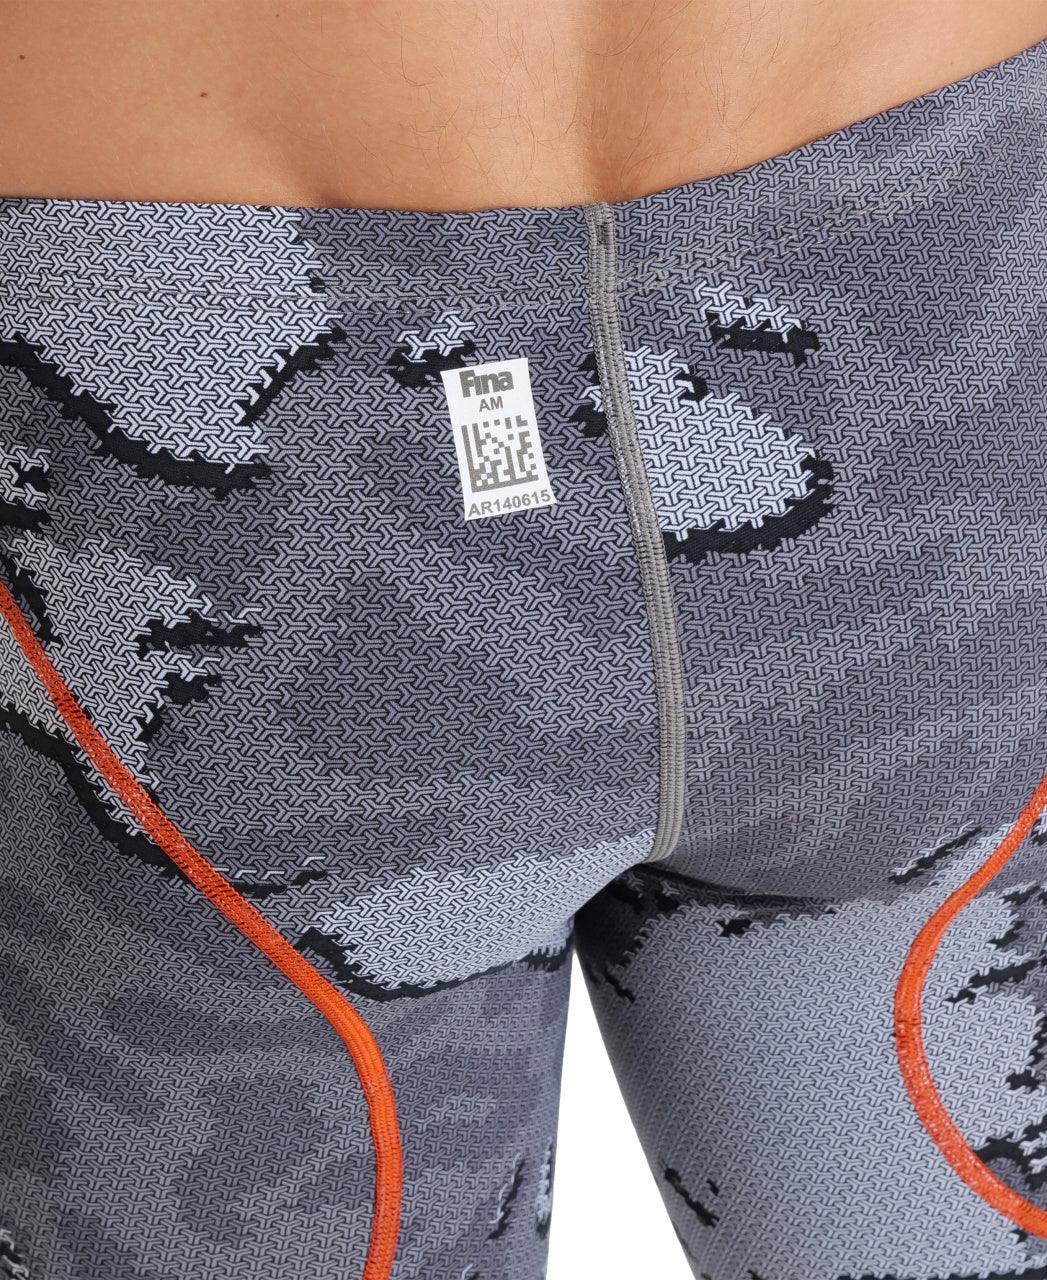 Men's Powerskin ST 2.0 Map Illusion LE Jammer - {{ collection.title }} - TIT